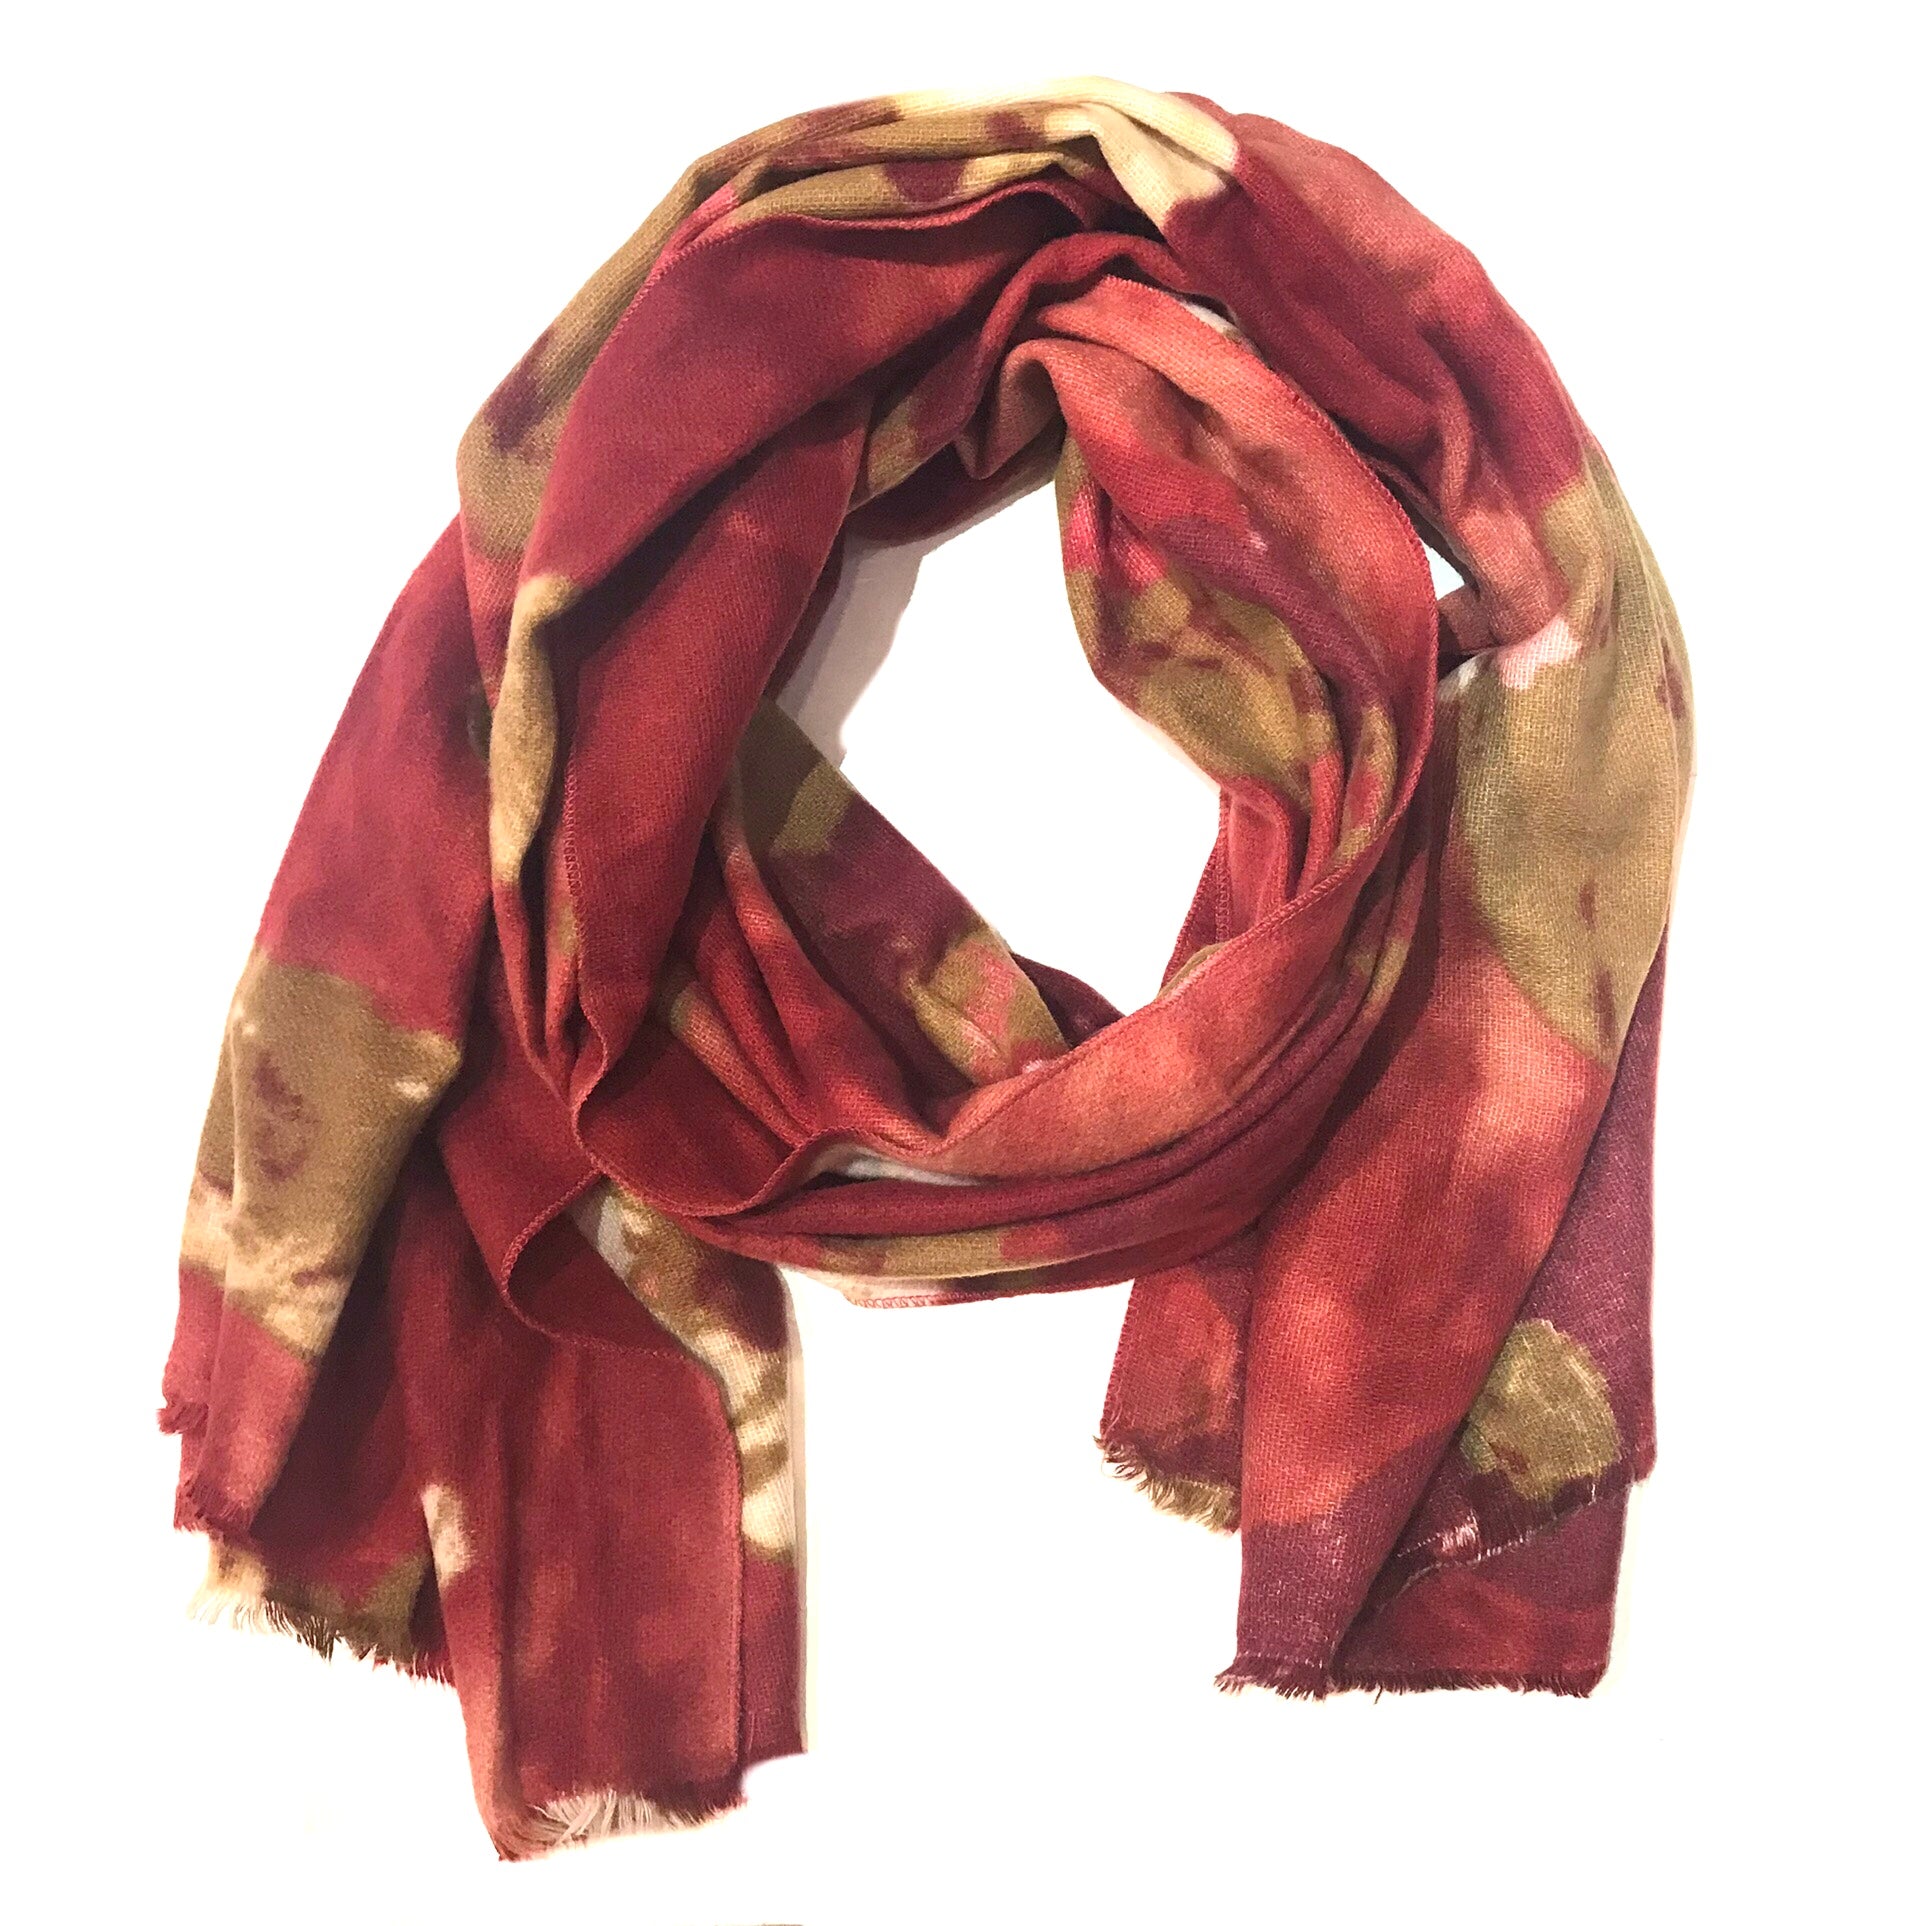 Abstract Flower Scarves